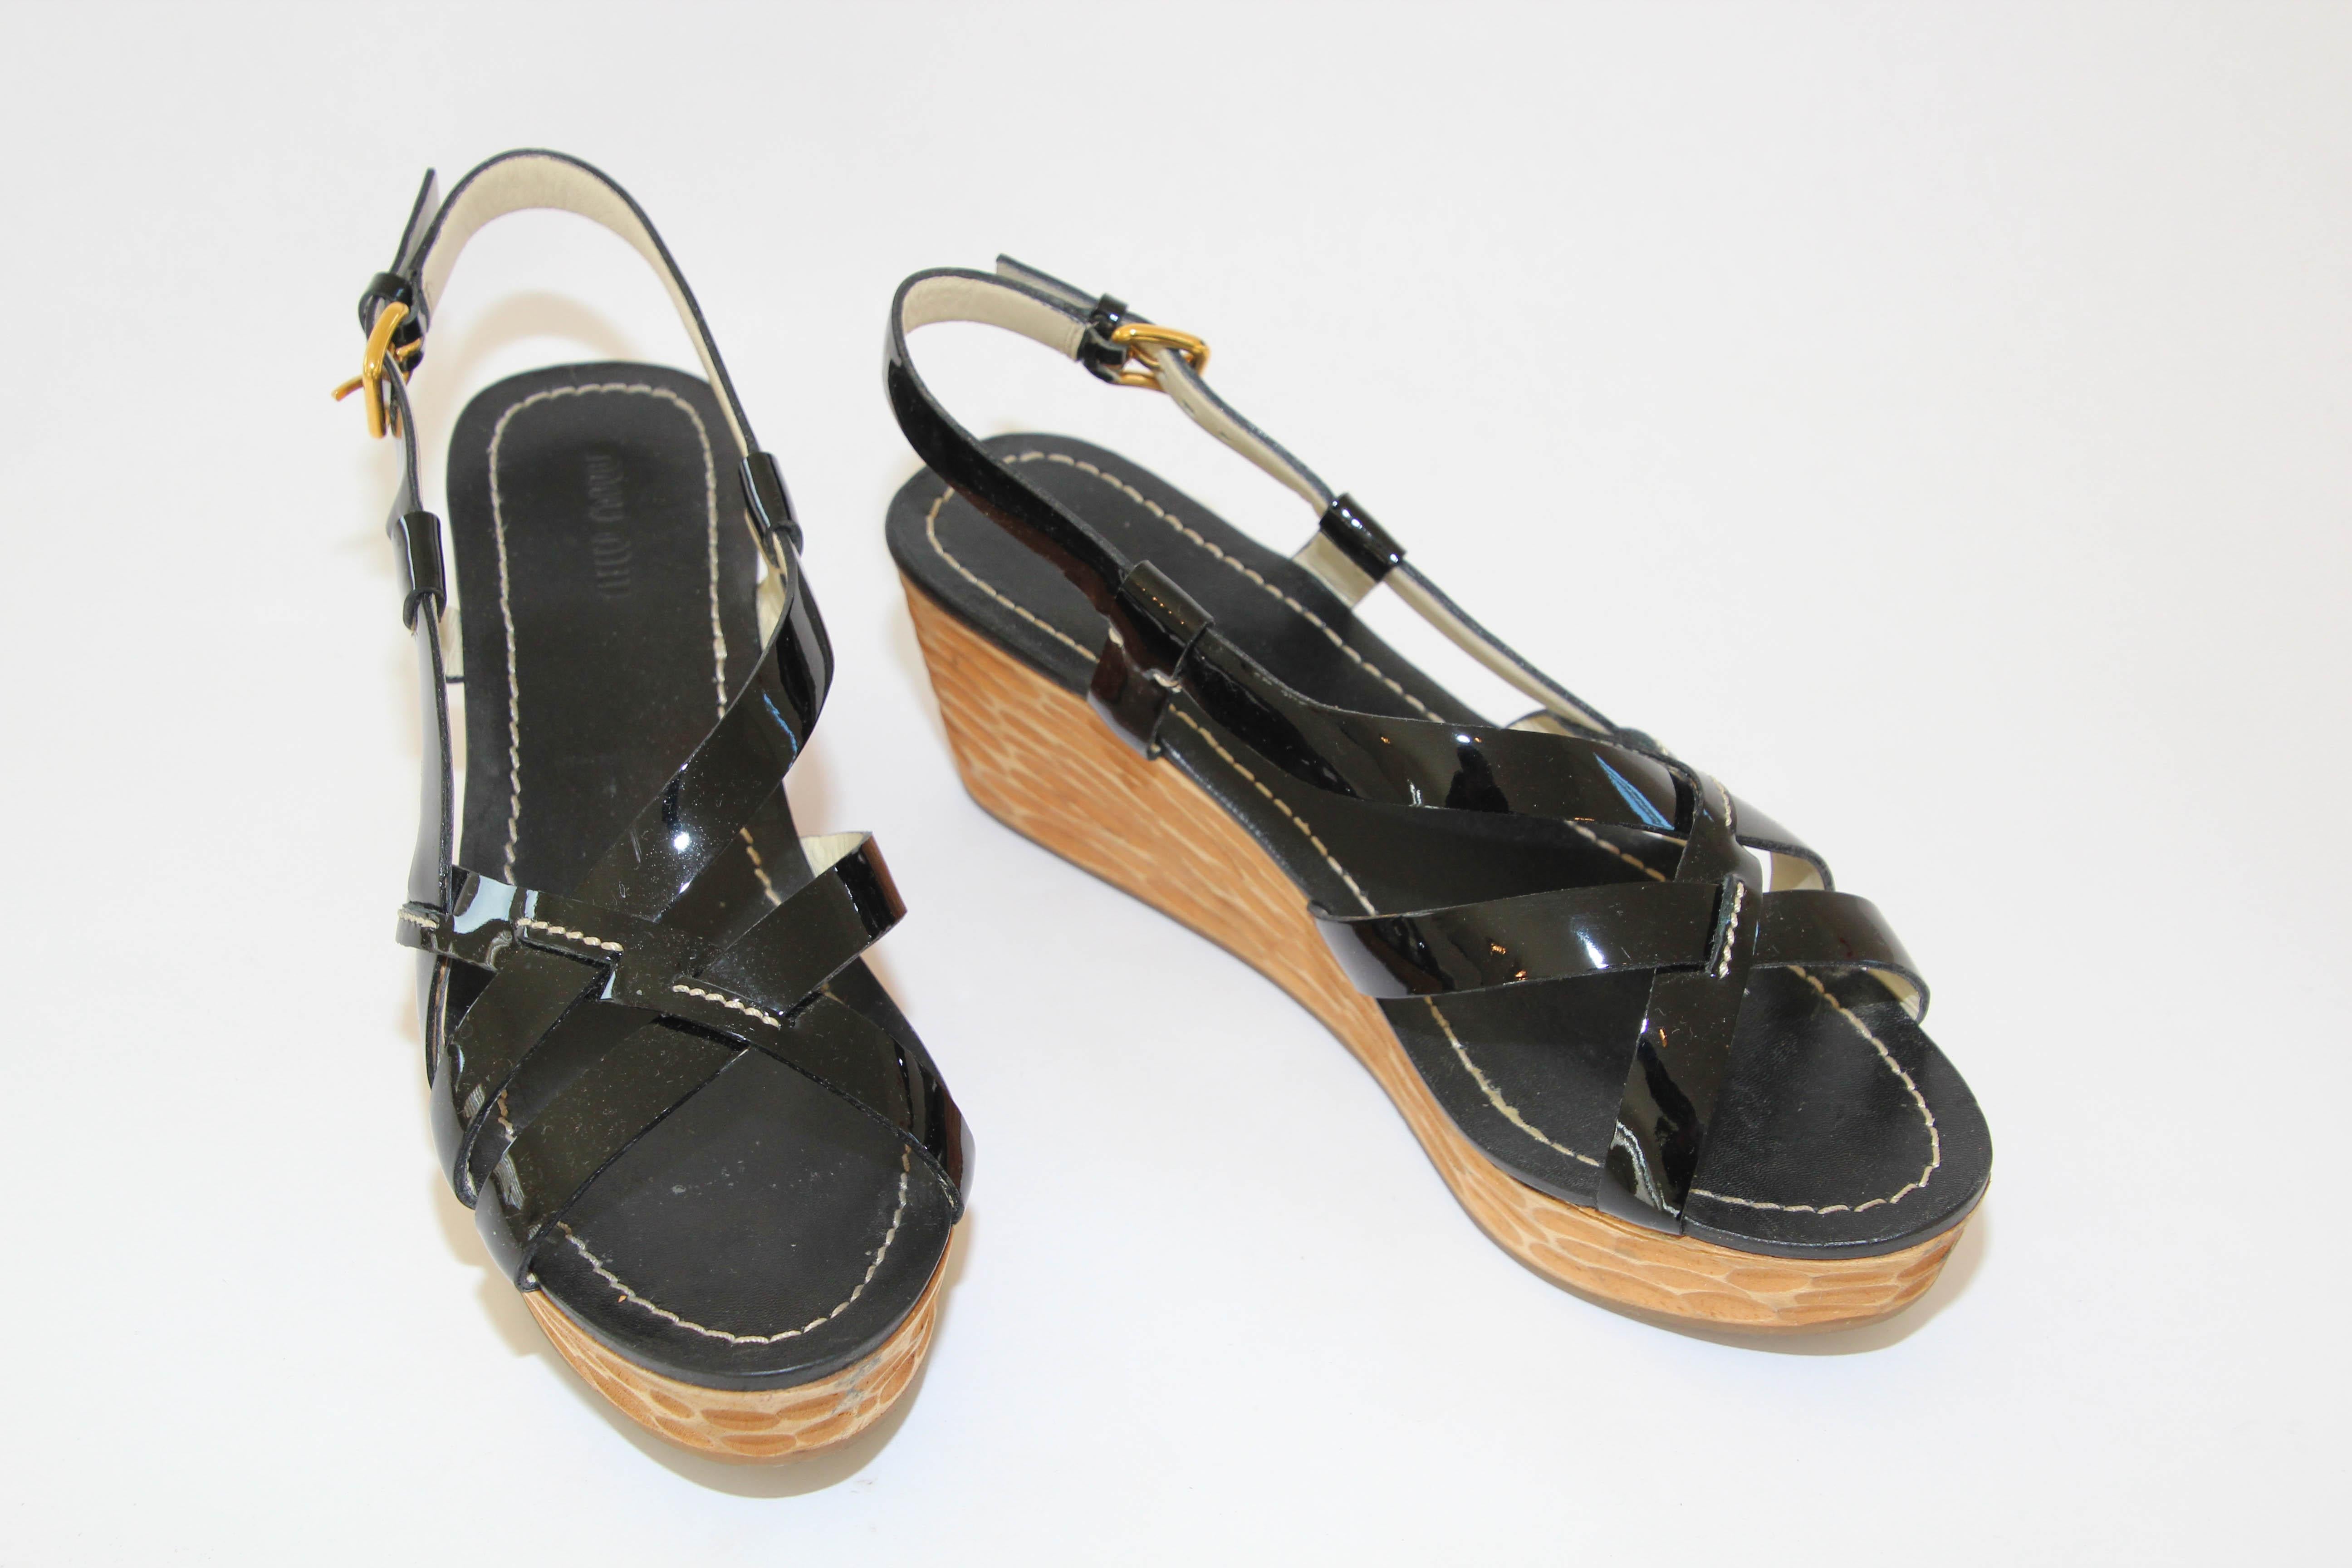 MIU MIU Black Criss Cross Patent Leather Sling Back Wooden Wedges Sandals For Sale 3